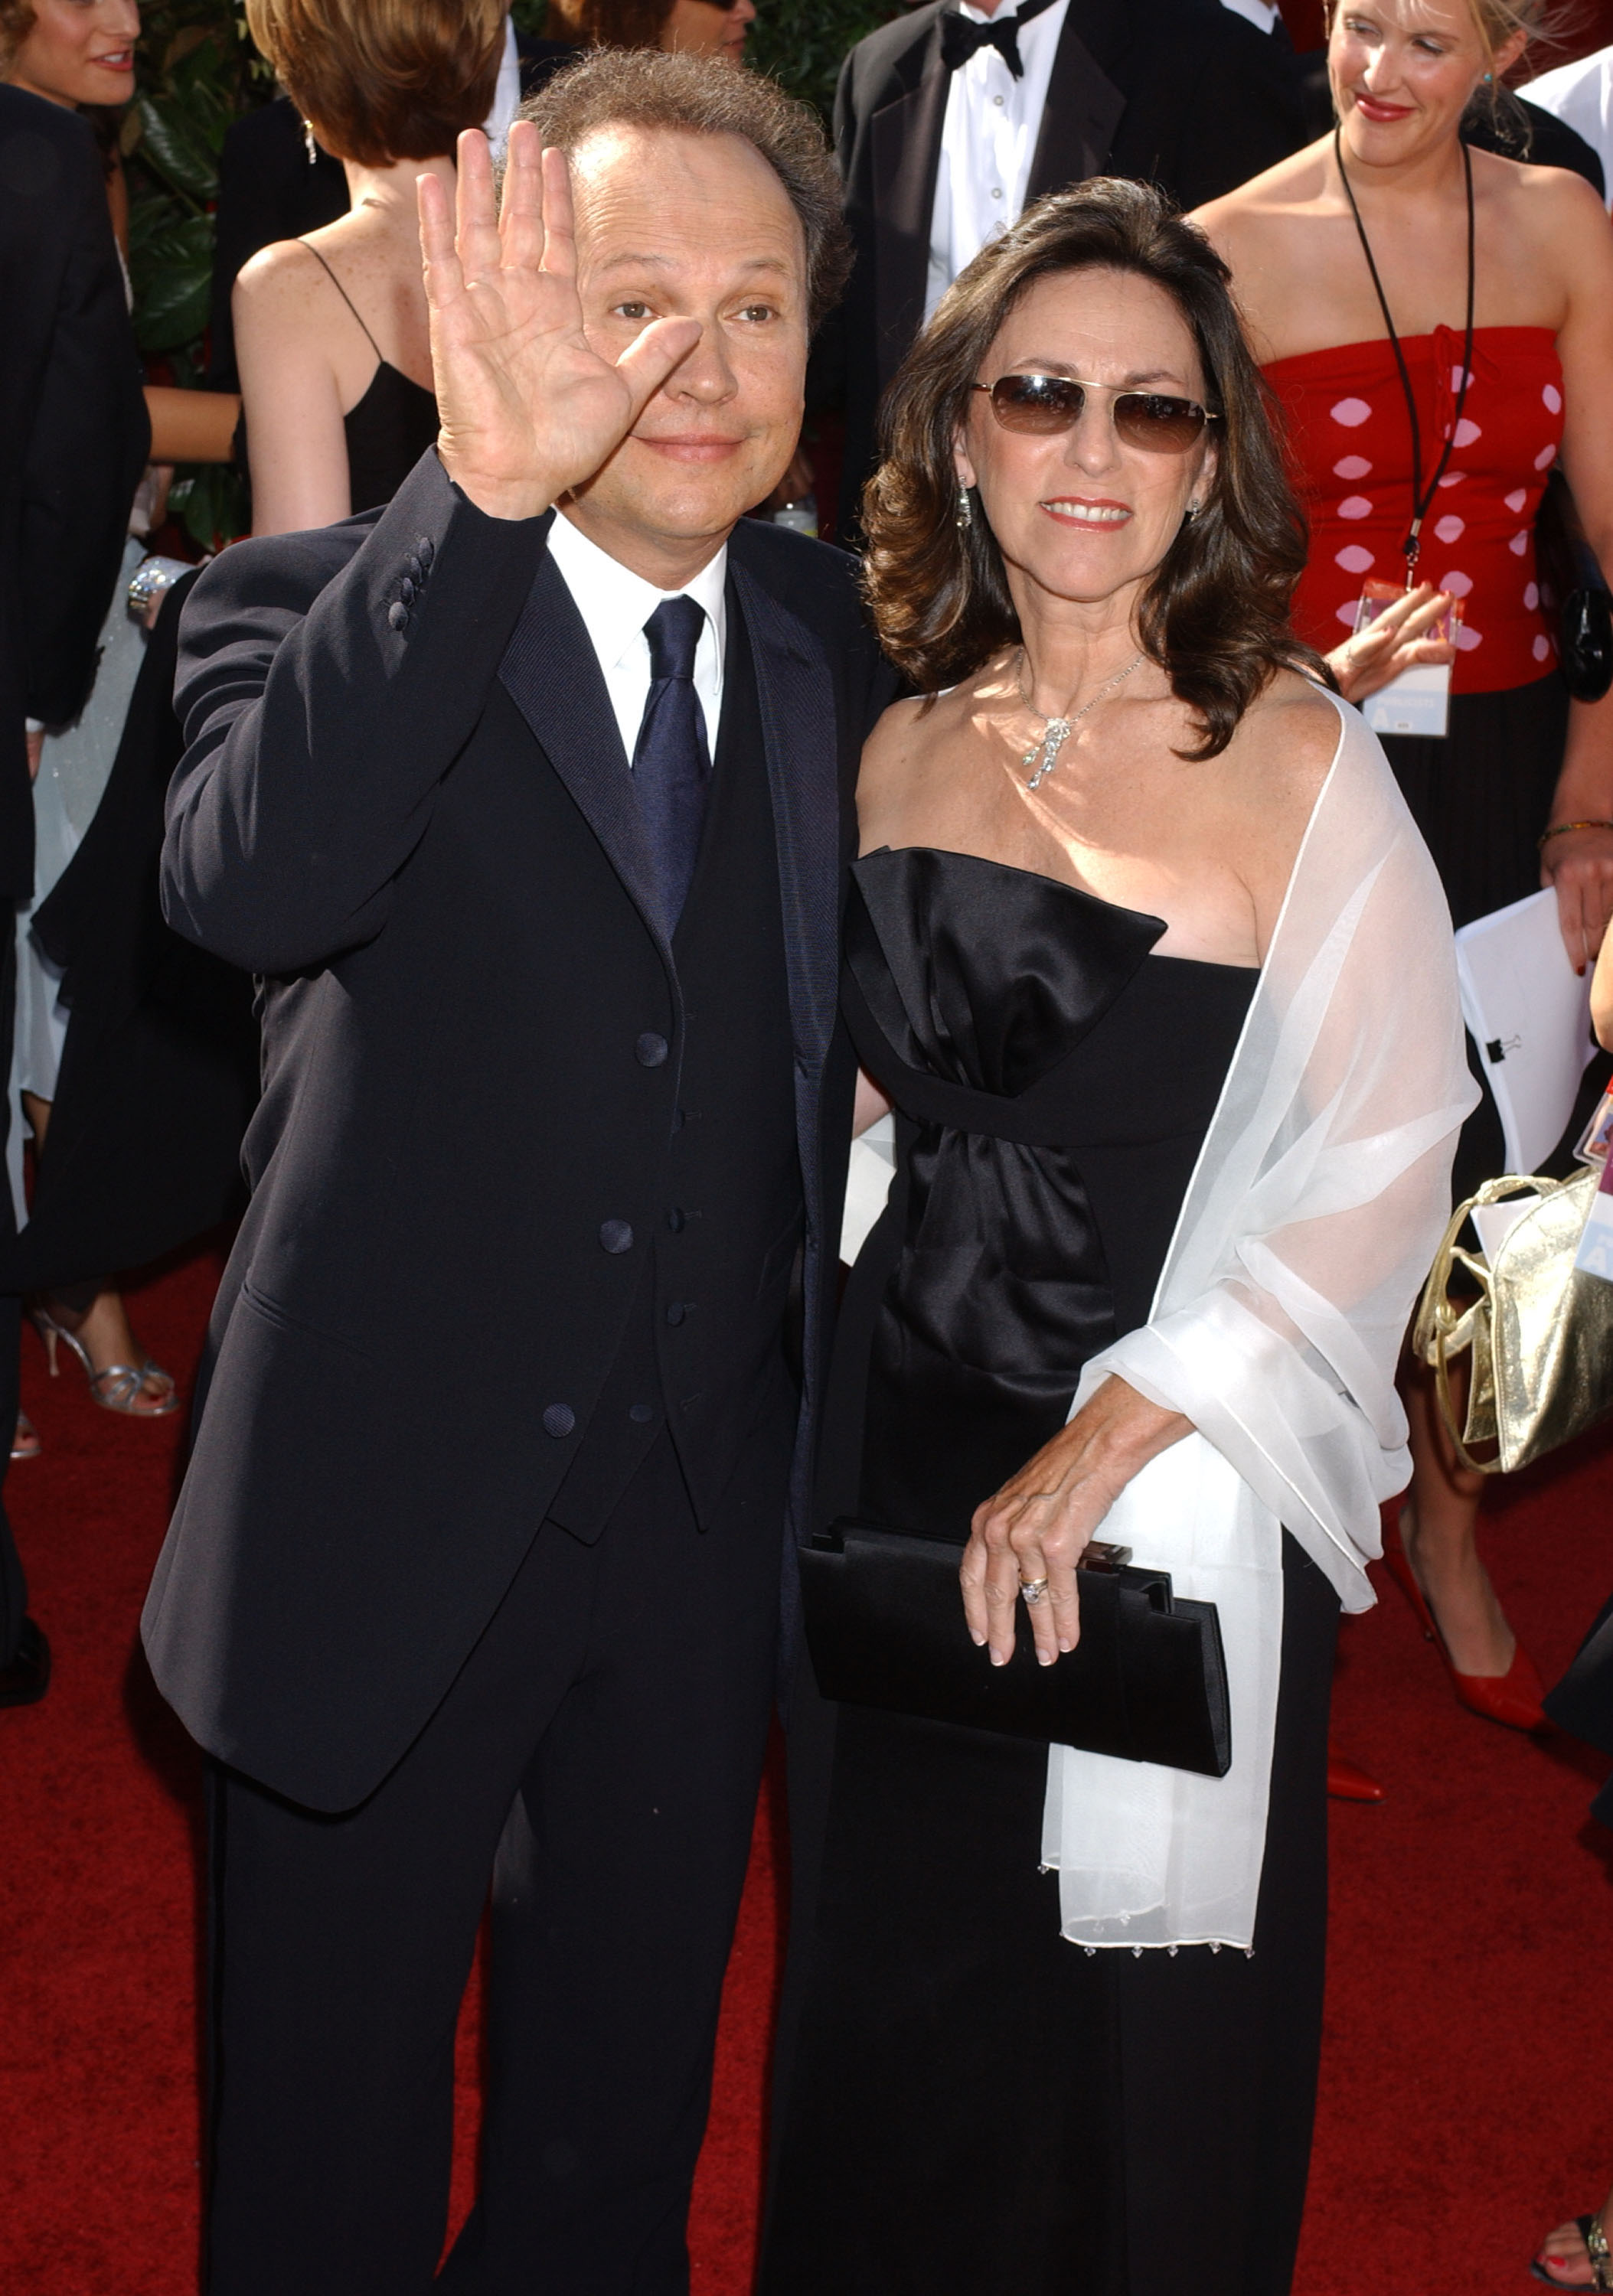 Billy Crystal and wife Janice during The 56th Annual Primetime Emmy Awards - Arrivals at The Shrine Auditorium on September 19, 2004, in Los Angeles, California, United States. | Source: Getty Images